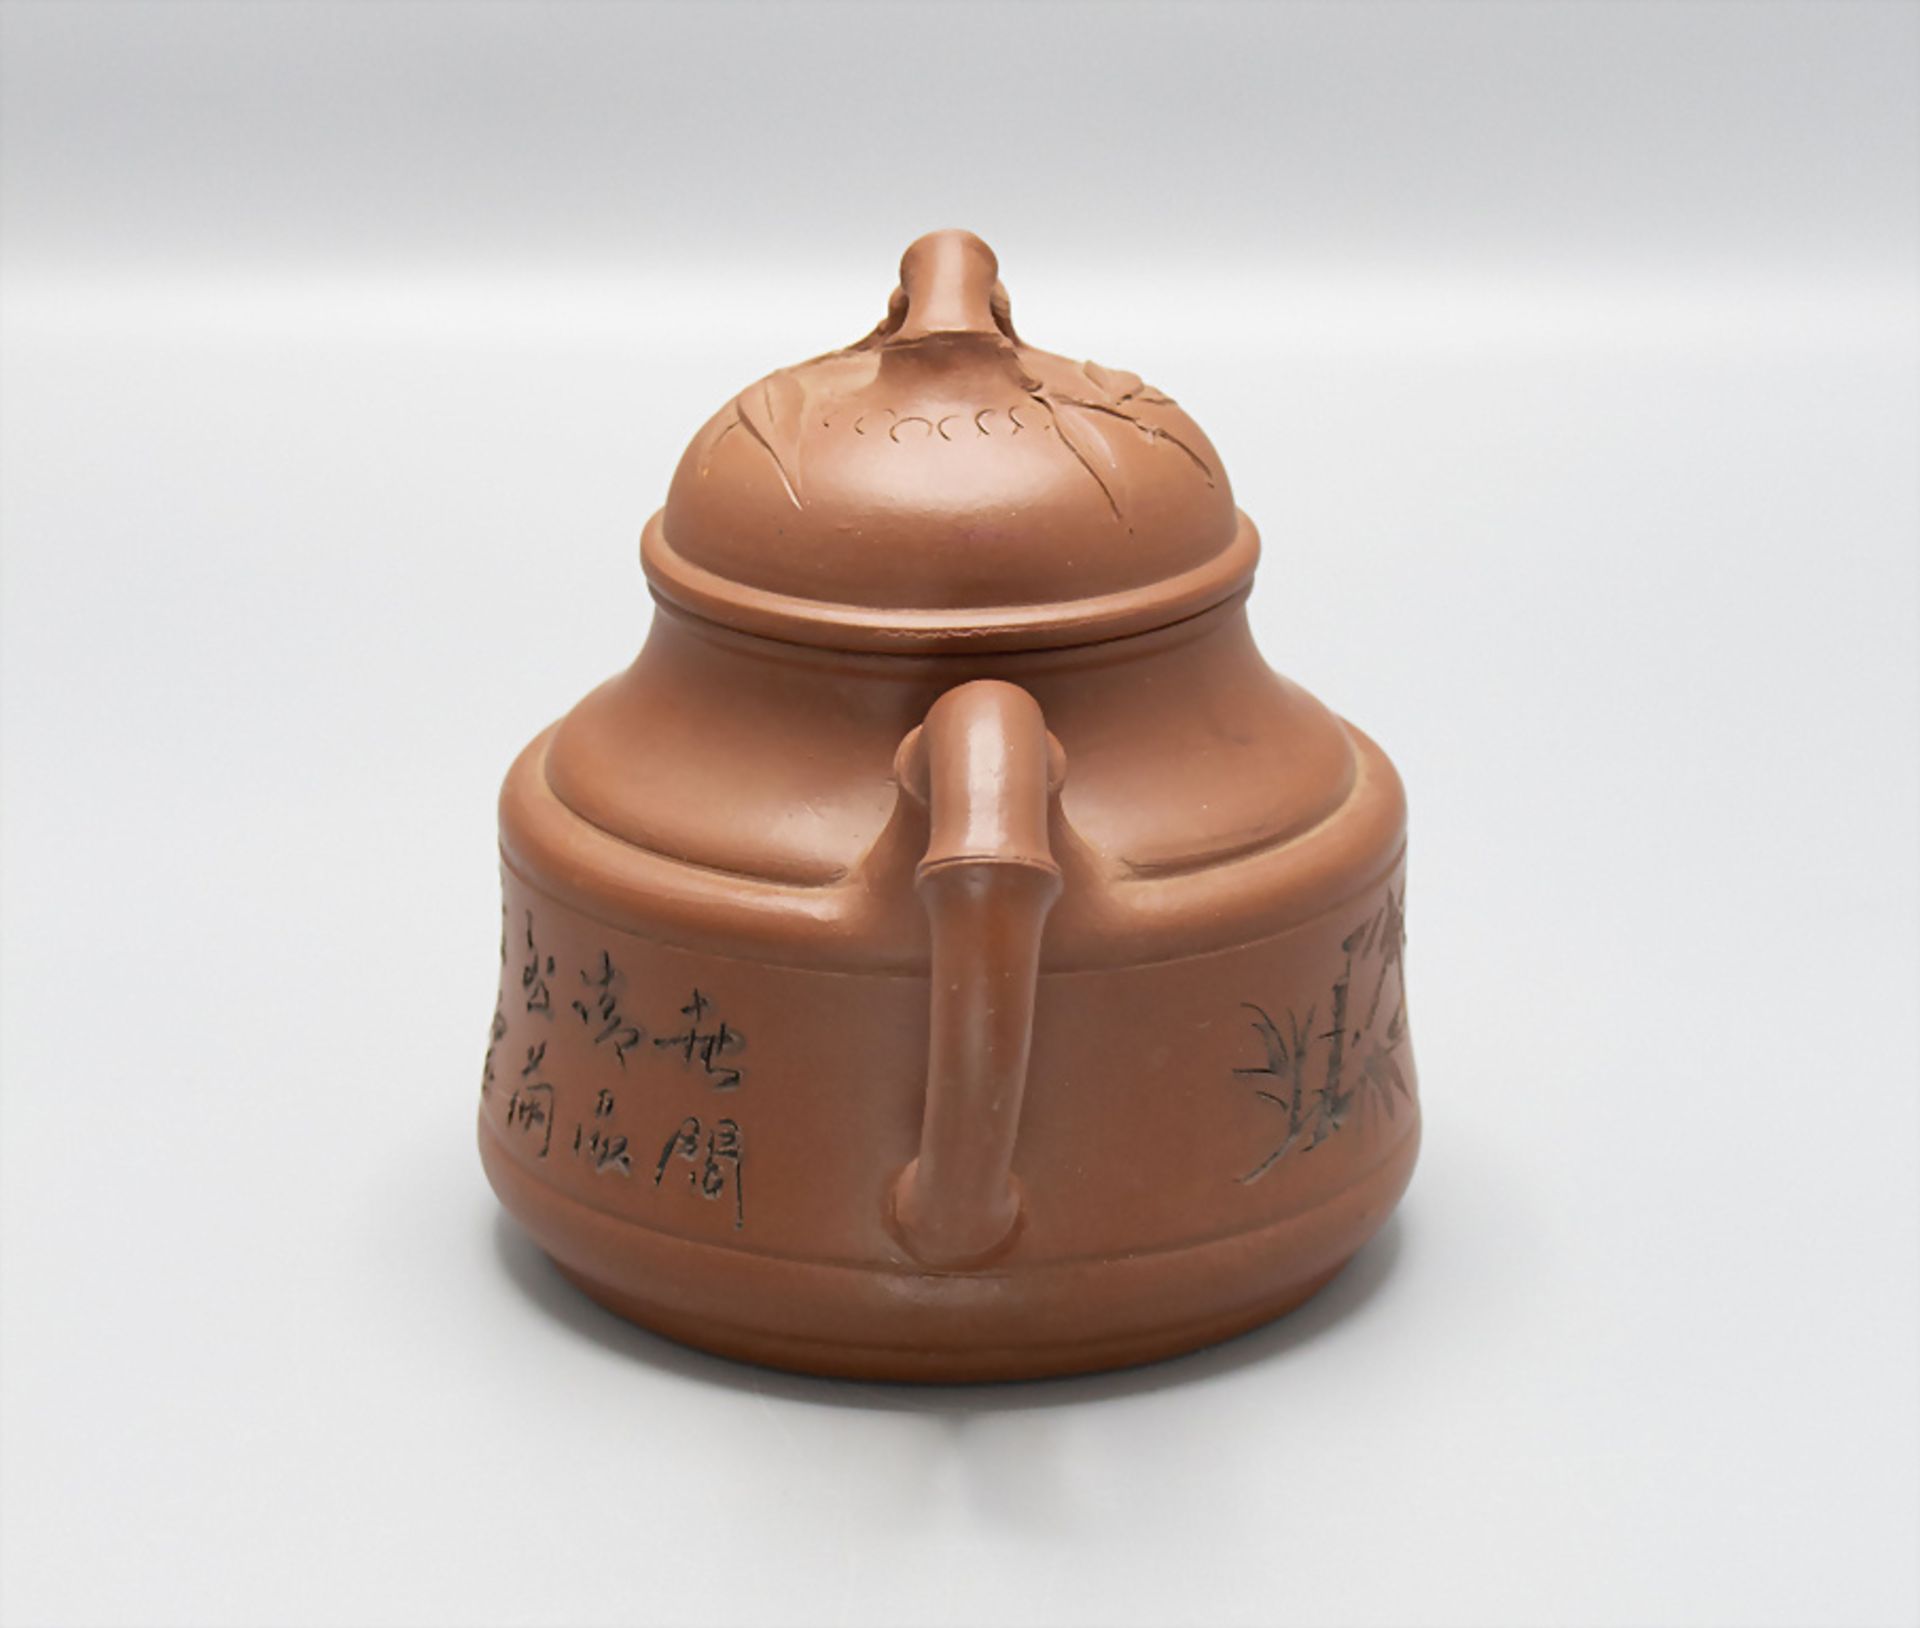 Bambus Teekanne mit Inschrift / A bamboo teapot with inscription, China, um 20. Jh. - Image 4 of 8